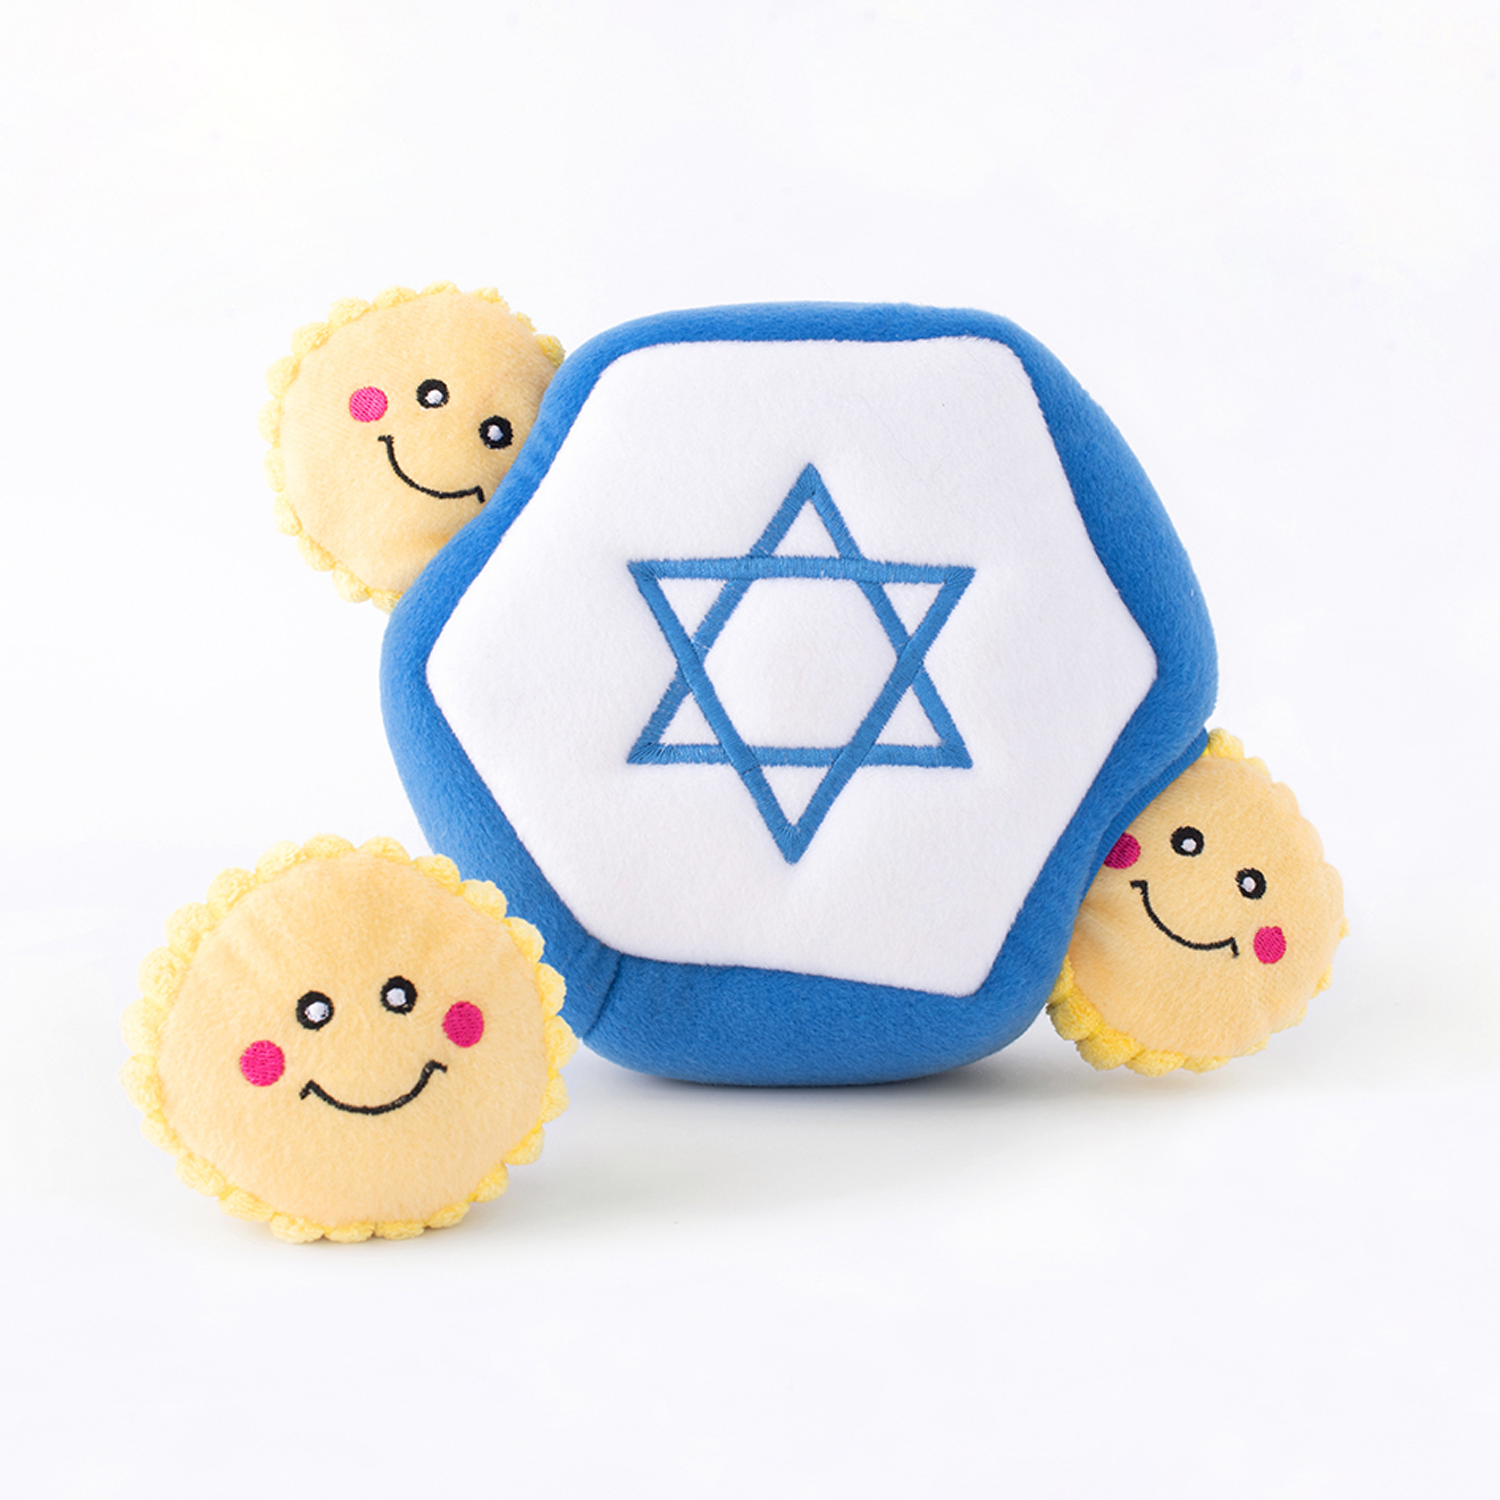 Pet Boutique - Star of David interactive Dog Toy Hanukkah Holiday by Zippy Paws